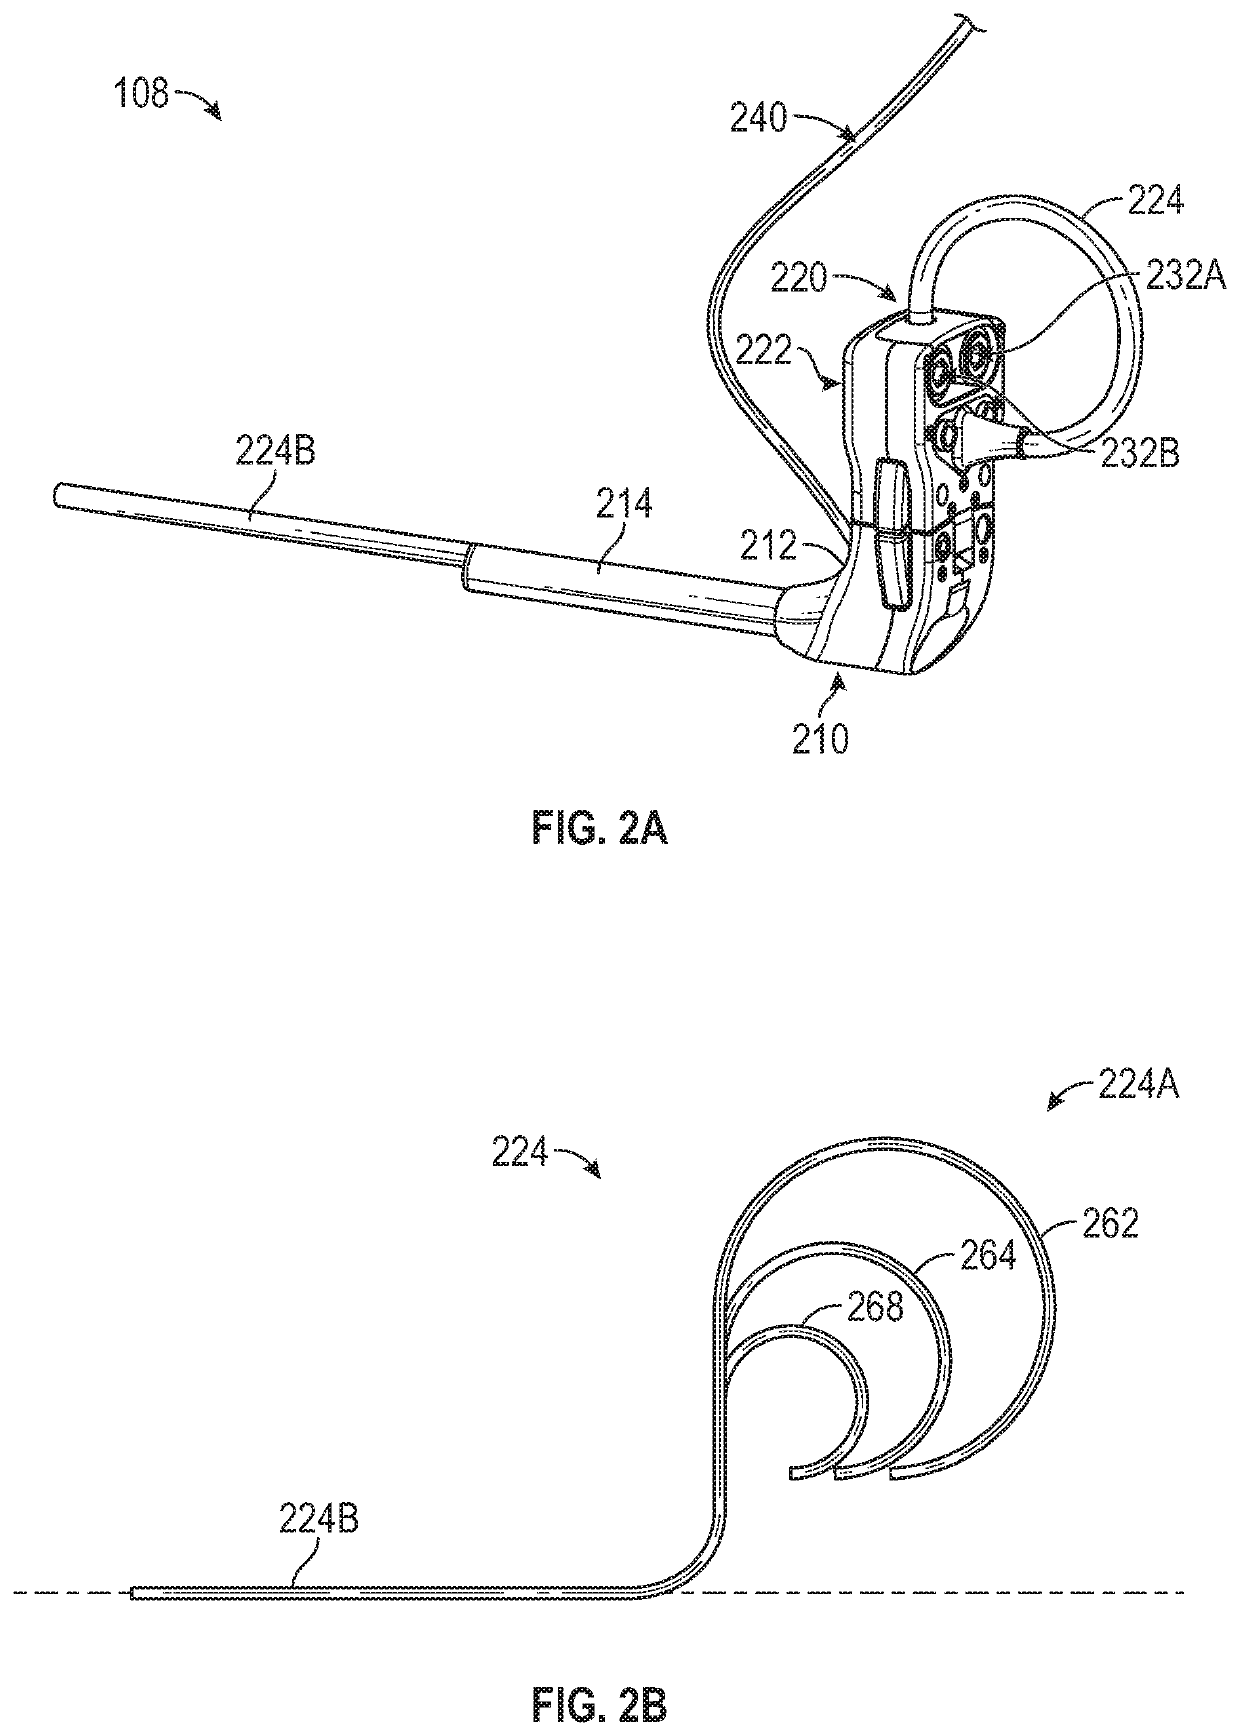 Camera positioning system, method, and apparatus for capturing images during a medical procedure